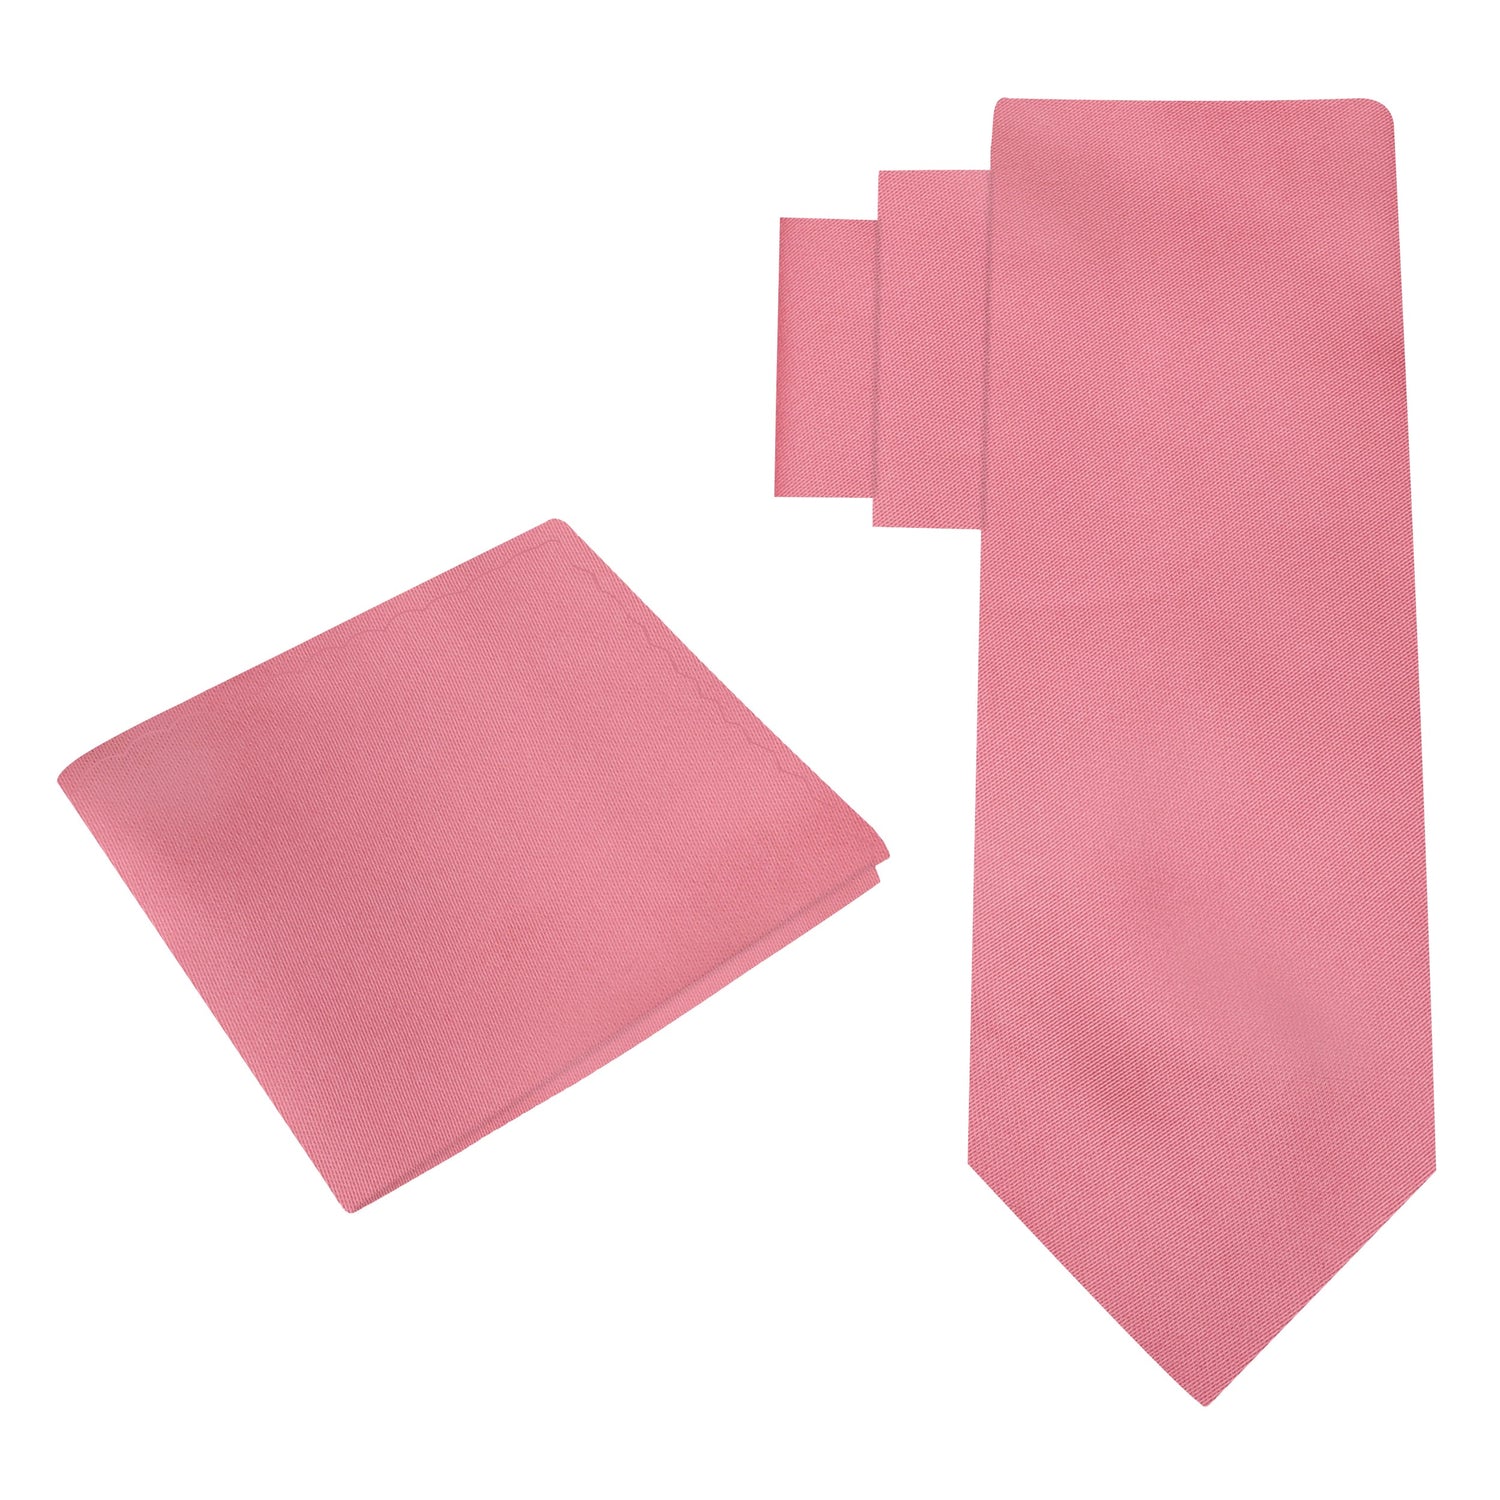 Alt View: Solid Glossy Salmon Pink Tie and Pocket Square